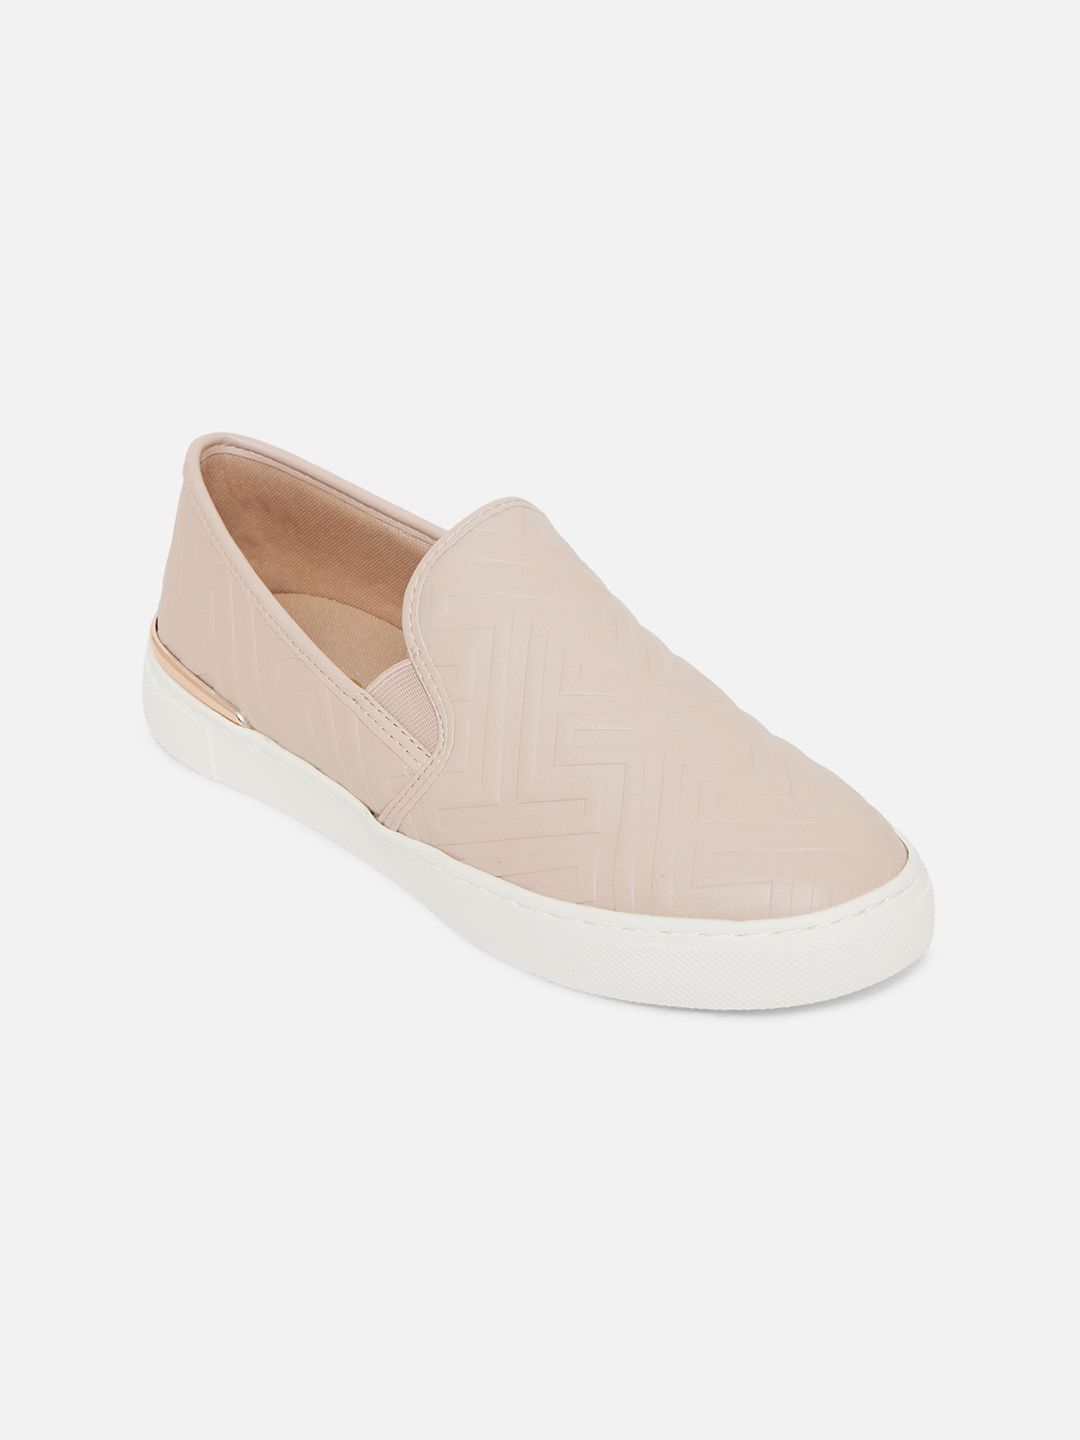 ALDO Women Pink Woven Design Slip-On Loafers Price in India